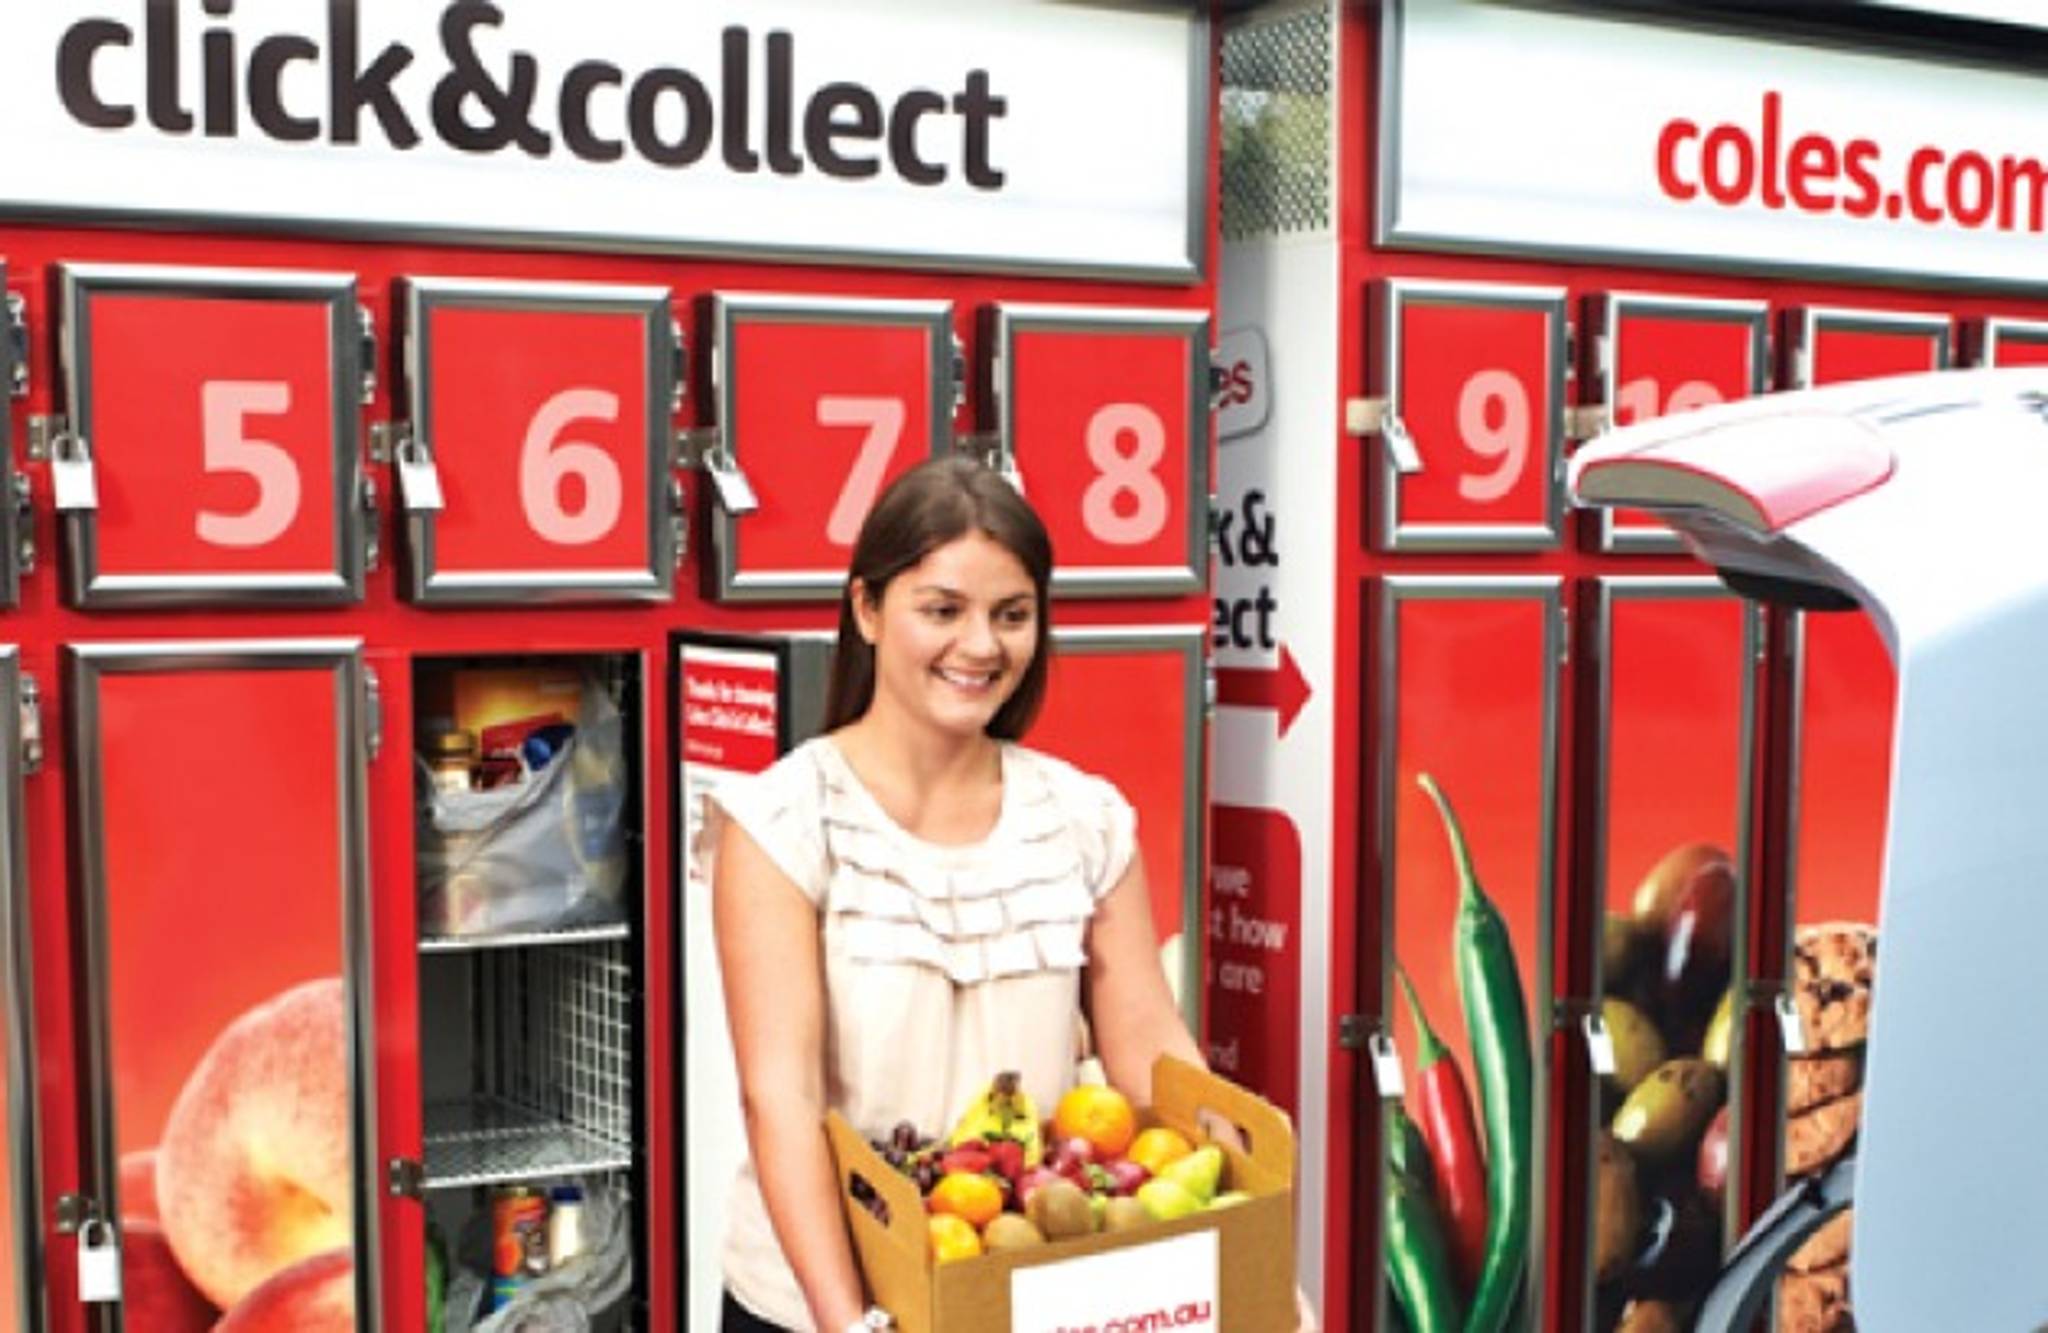 Everywhere shopping: Click & Collect delivers